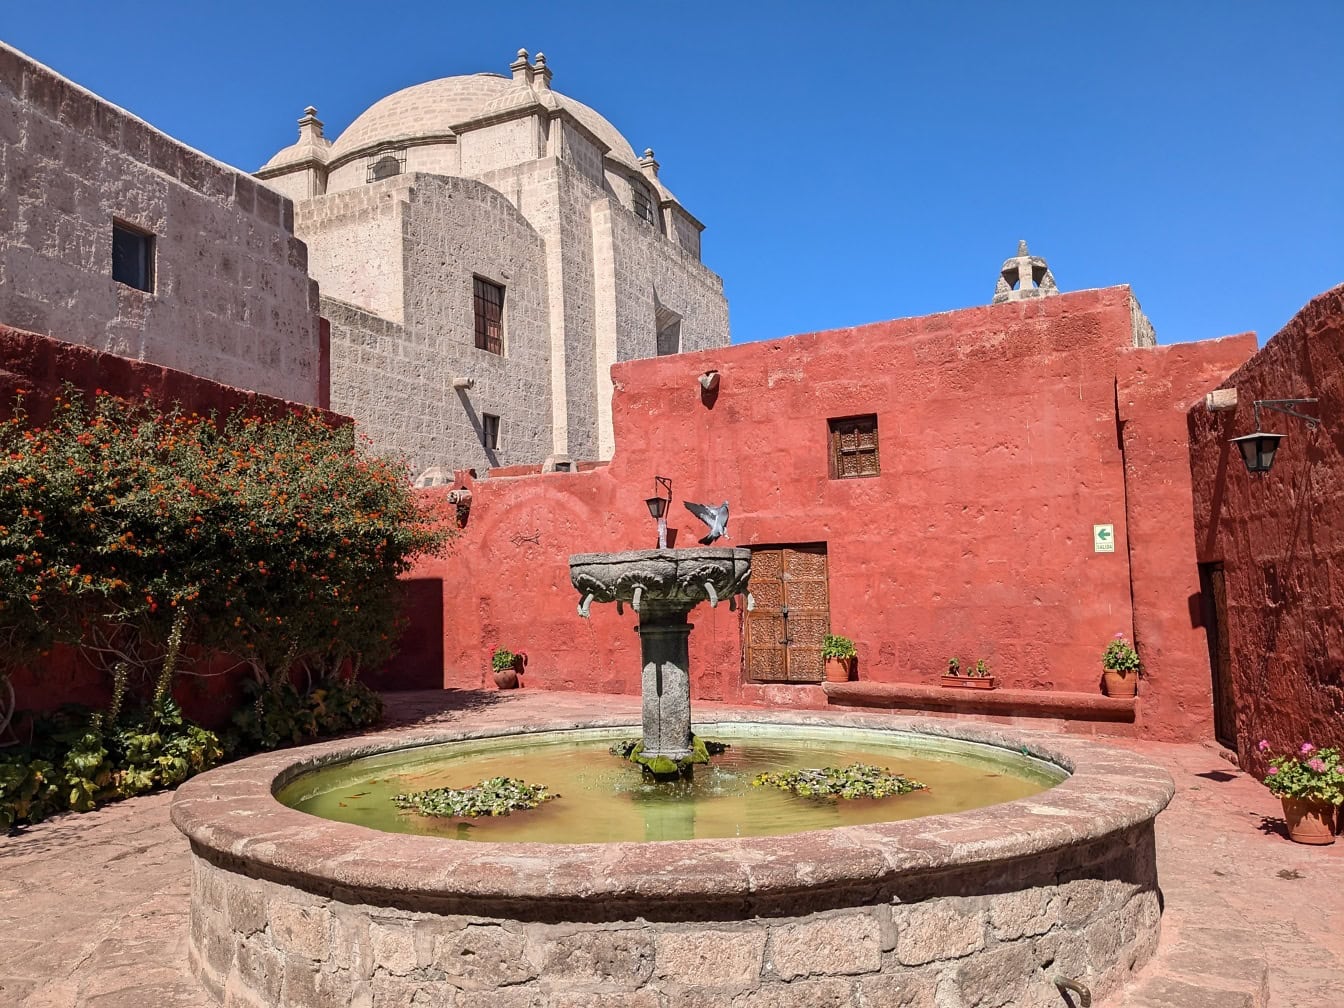 A fountain in a courtyard with church with dome in the background, at monastery of Santa Catalina de Siena in Arequipa in Peru